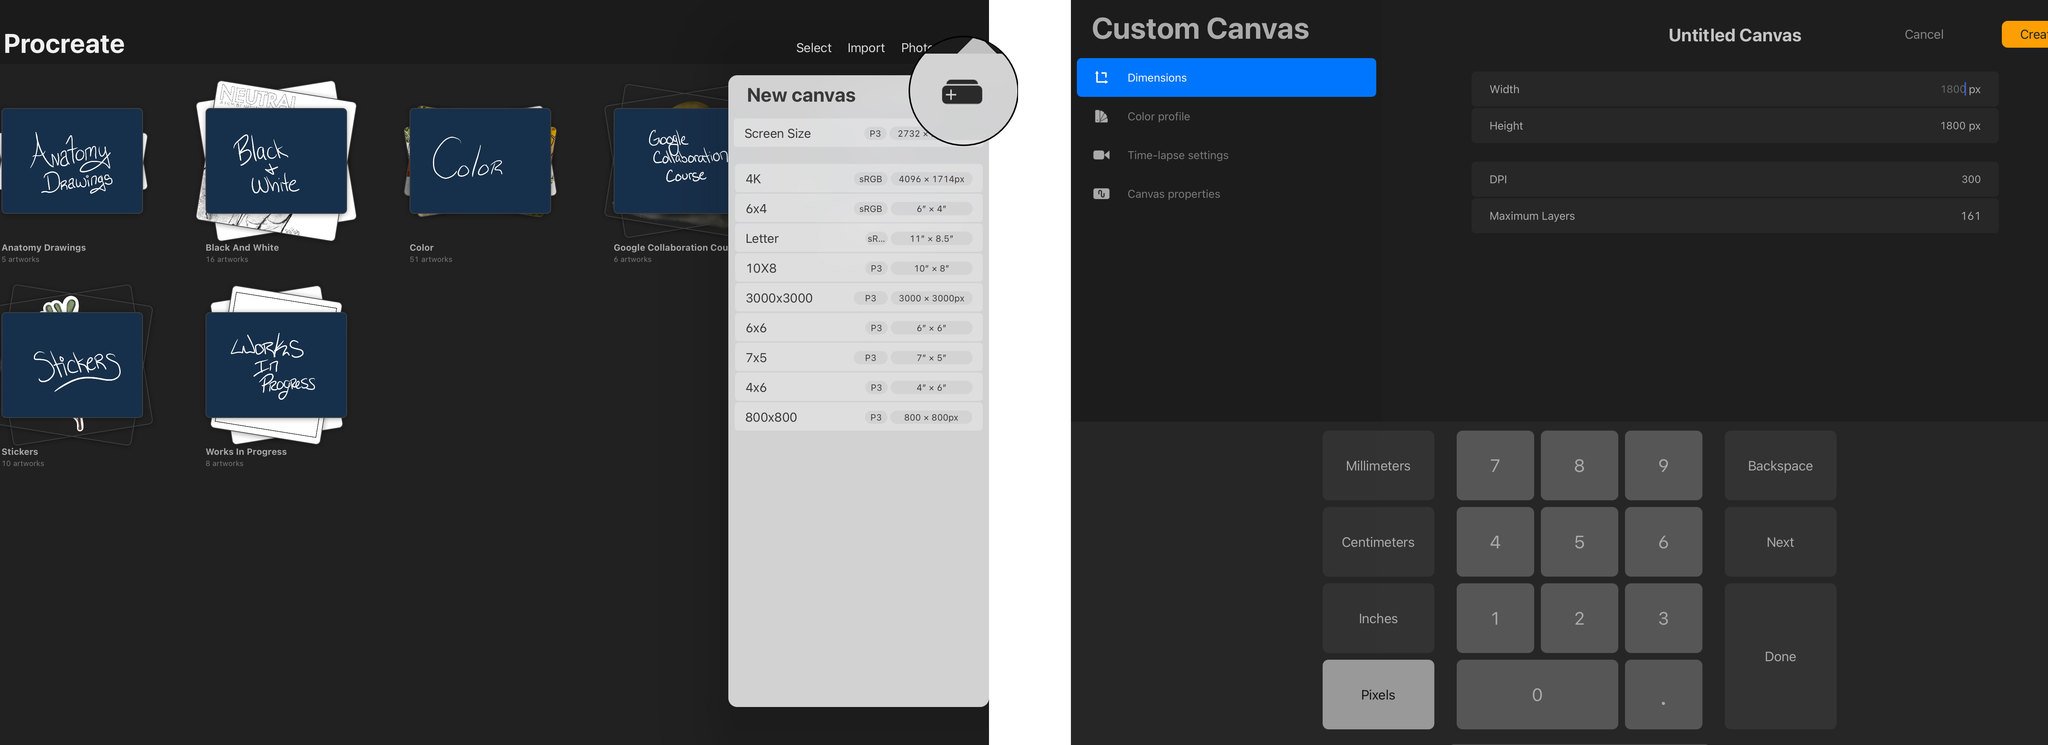 To begin a New Custom Canvas, tap on the + Sign to open the New Canvas Pane, and then tap on the New Canvas Icon to open the Custom Canvas window.